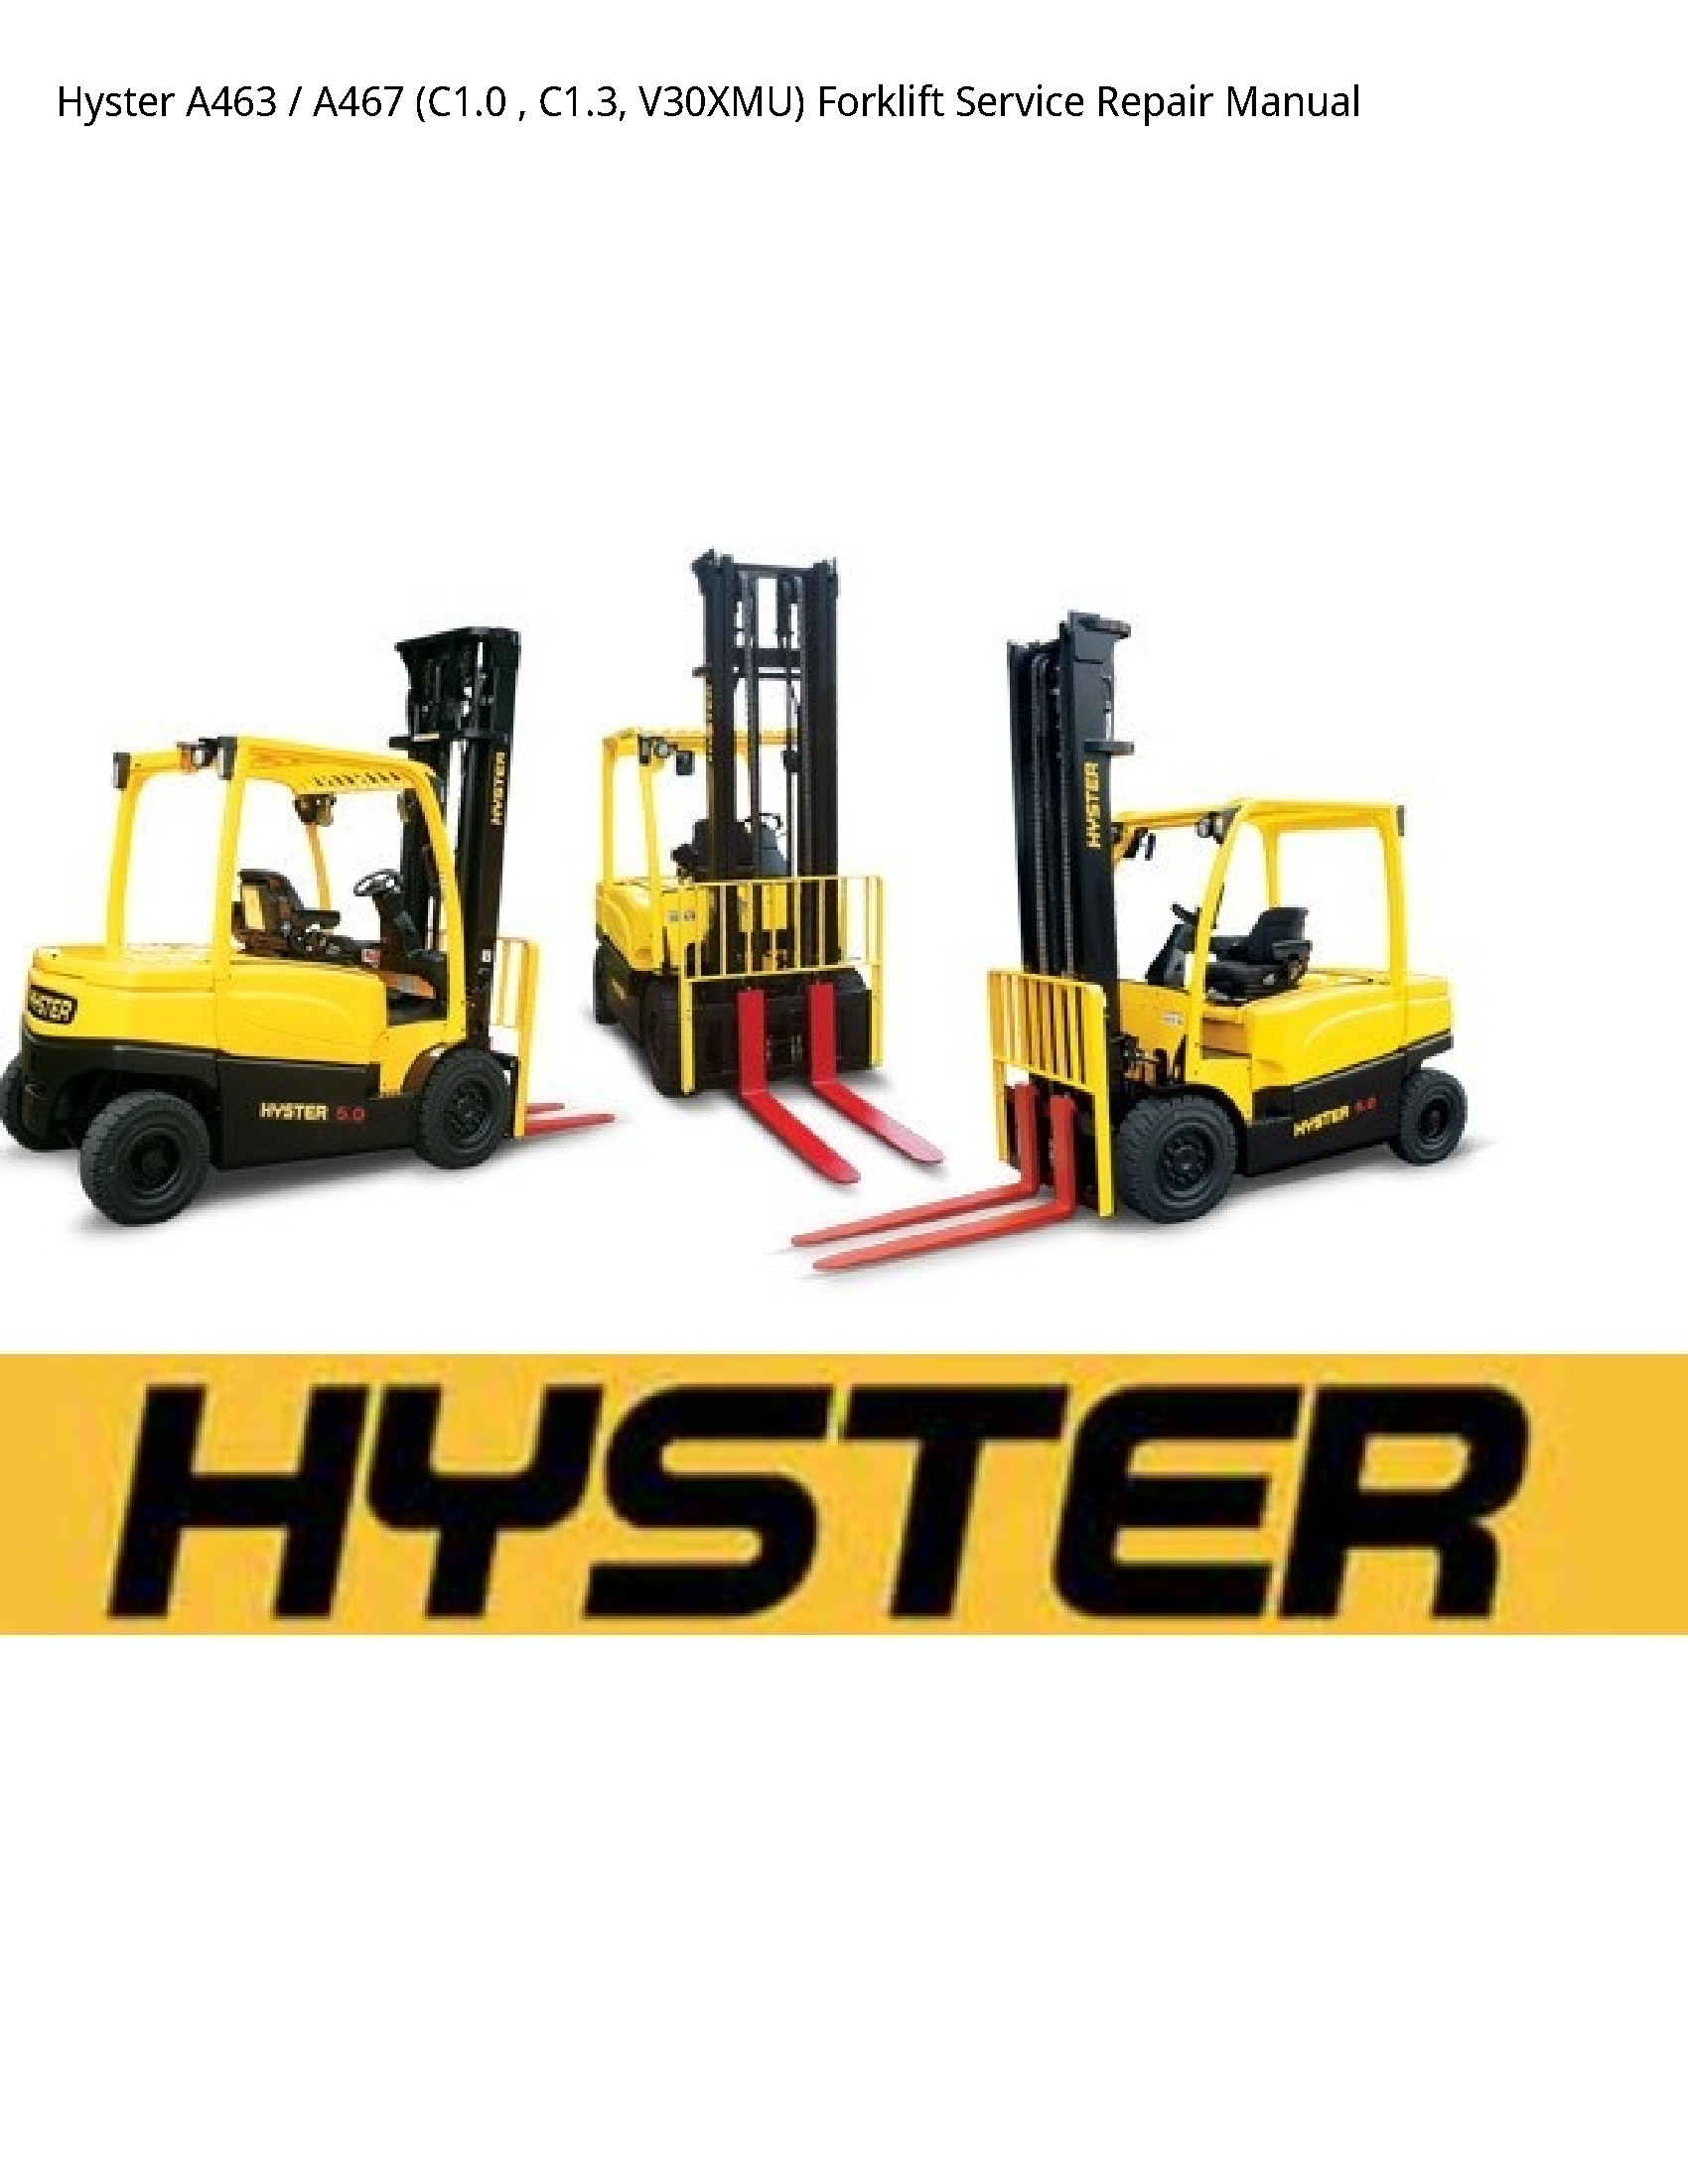 Hyster A463 Forklift manual